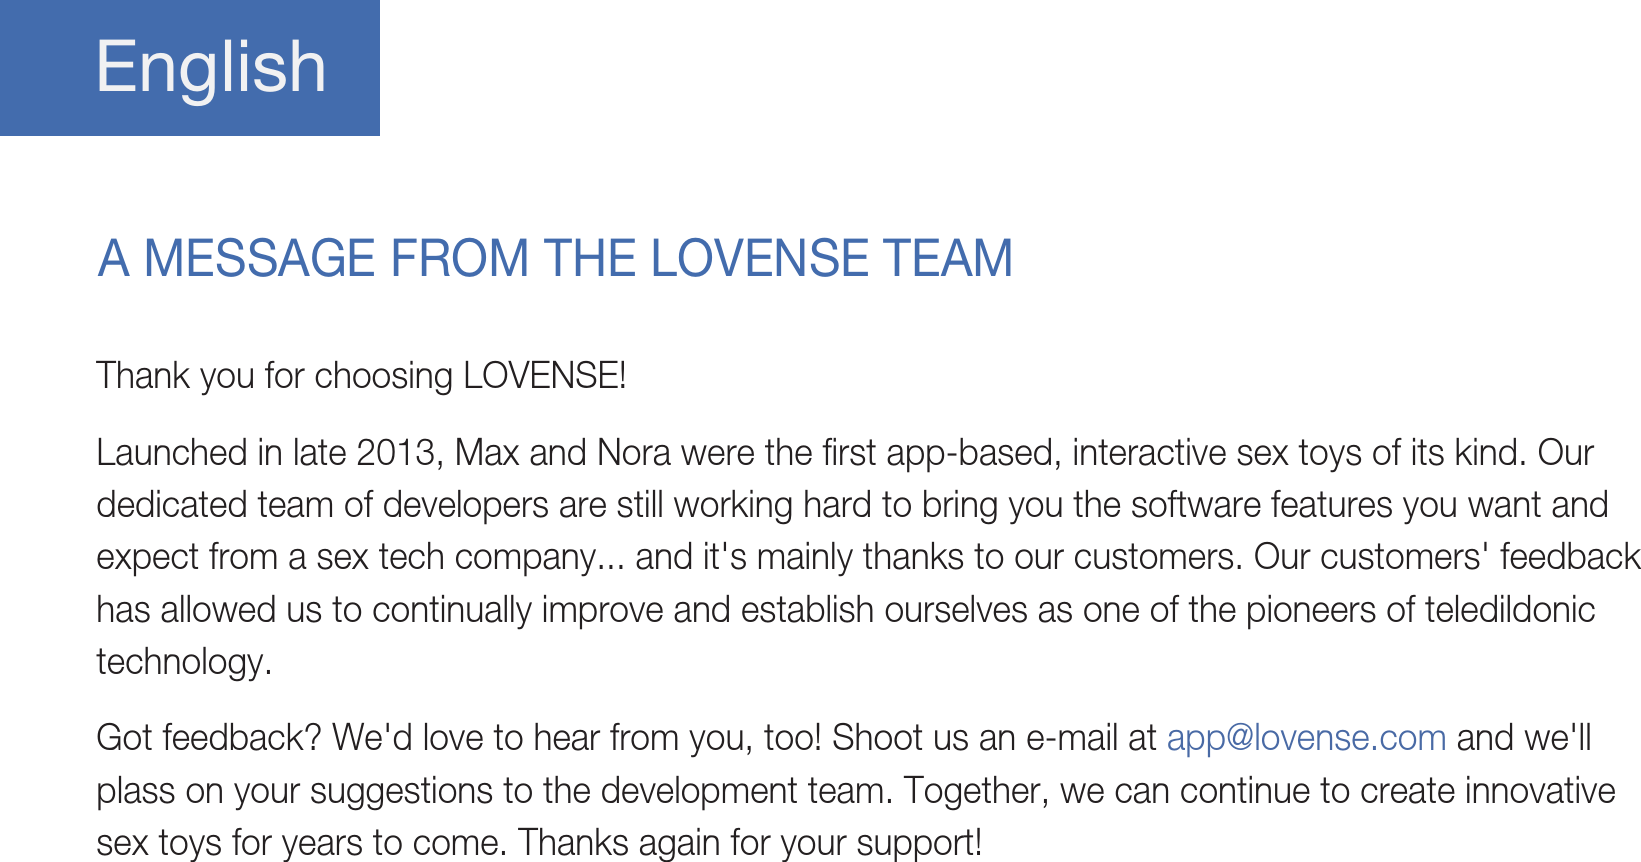 EnglishA MESSAGE FROM THE LOVENSE TEAMThank you for choosing LOVENSE!Launched in late 2013, Max and Nora were the first app-based, interactive sex toys of its kind. Our dedicated team of developers are still working hard to bring you the software features you want and expect from a sex tech company... and it&apos;s mainly thanks to our customers. Our customers&apos; feedback has allowed us to continually improve and establish ourselves as one of the pioneers of teledildonic technology. Got feedback? We&apos;d love to hear from you, too! Shoot us an e-mail at app@lovense.com and we&apos;ll plass on your suggestions to the development team. Together, we can continue to create innovative sex toys for years to come. Thanks again for your support!